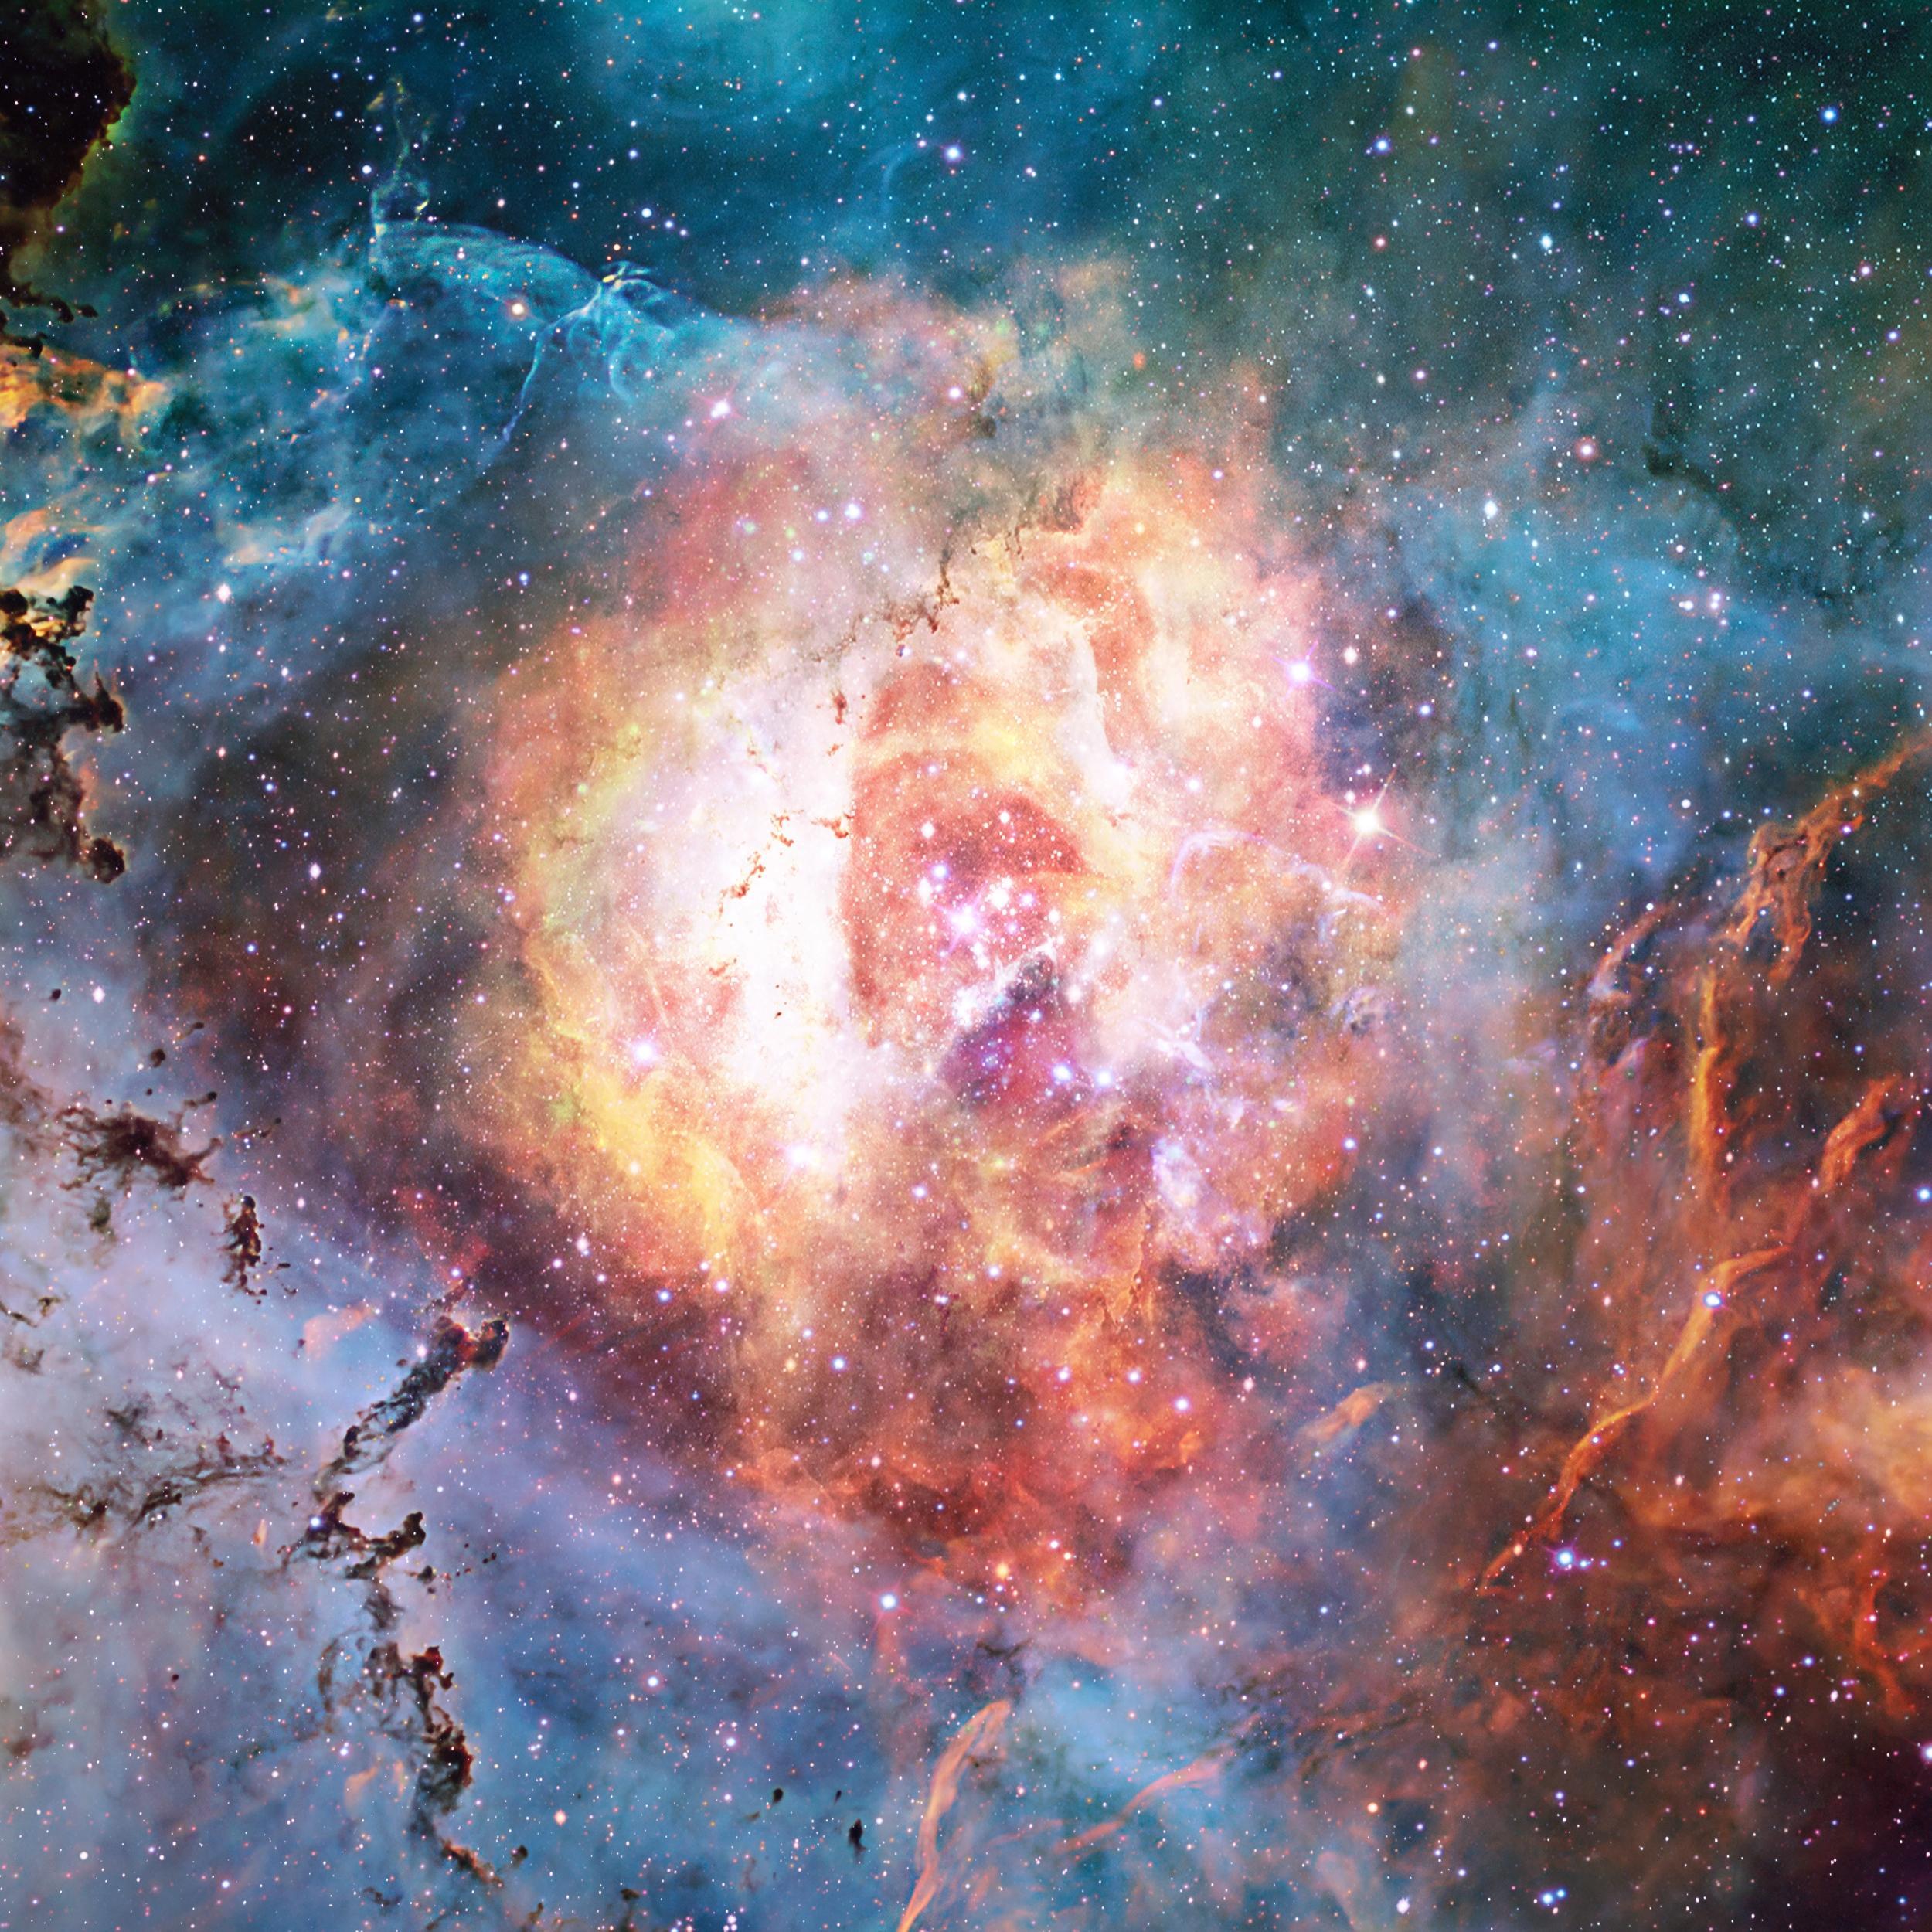 6 Awesome Cosmos Inspired HD Wallpapers